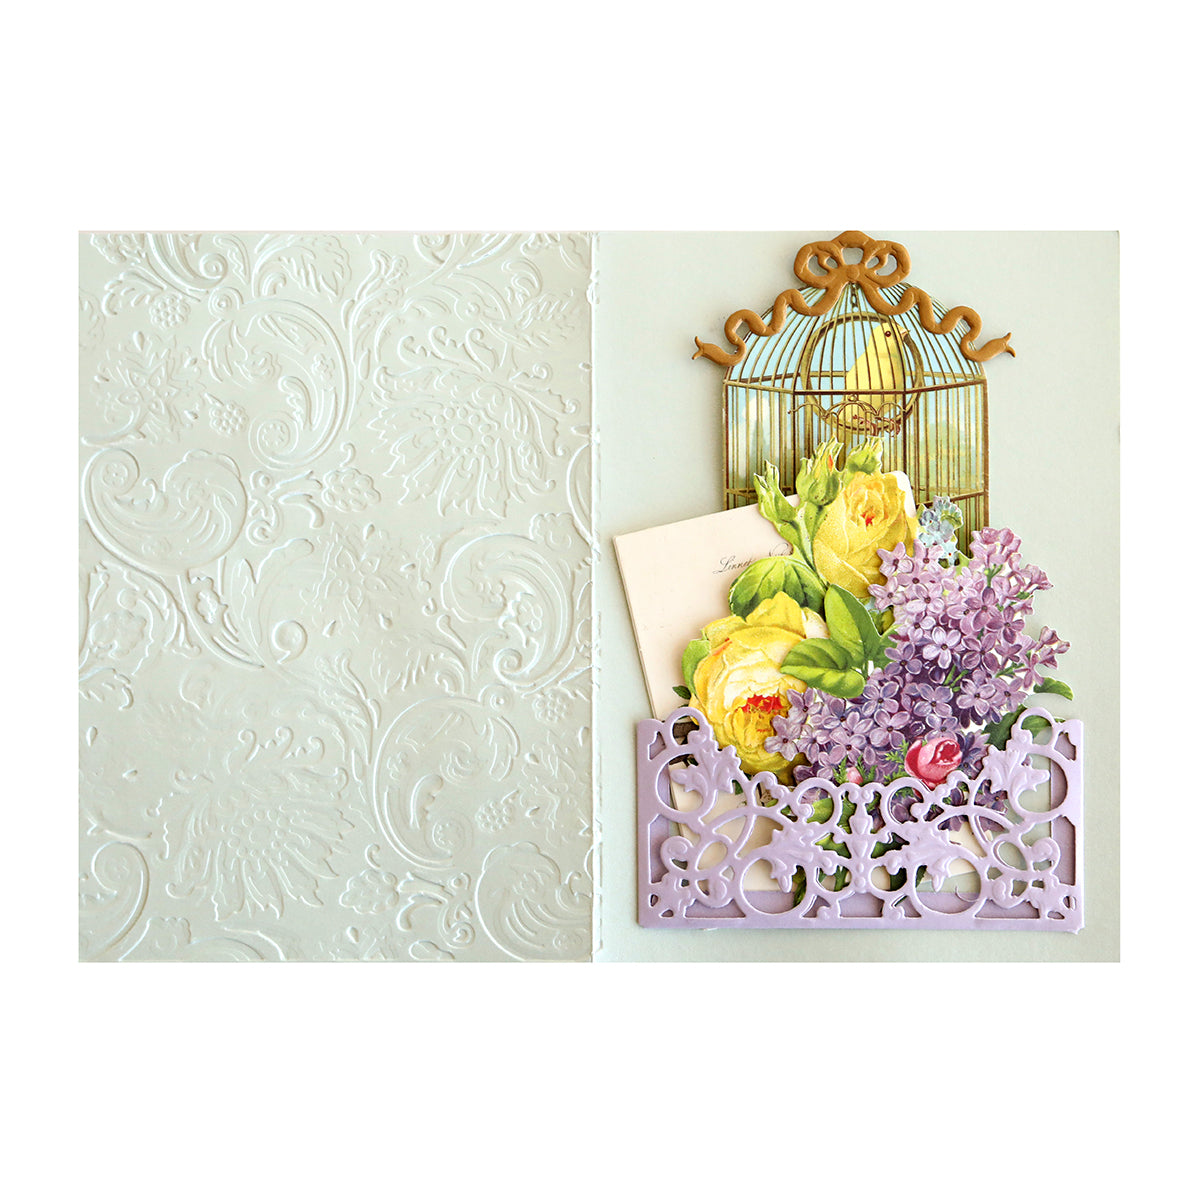 An elegant card featuring a delicate birdcage and beautiful flowers, created using the Anniversary Pocket Dies. This stunning design is perfect for creating mini album cards that will be cherished for